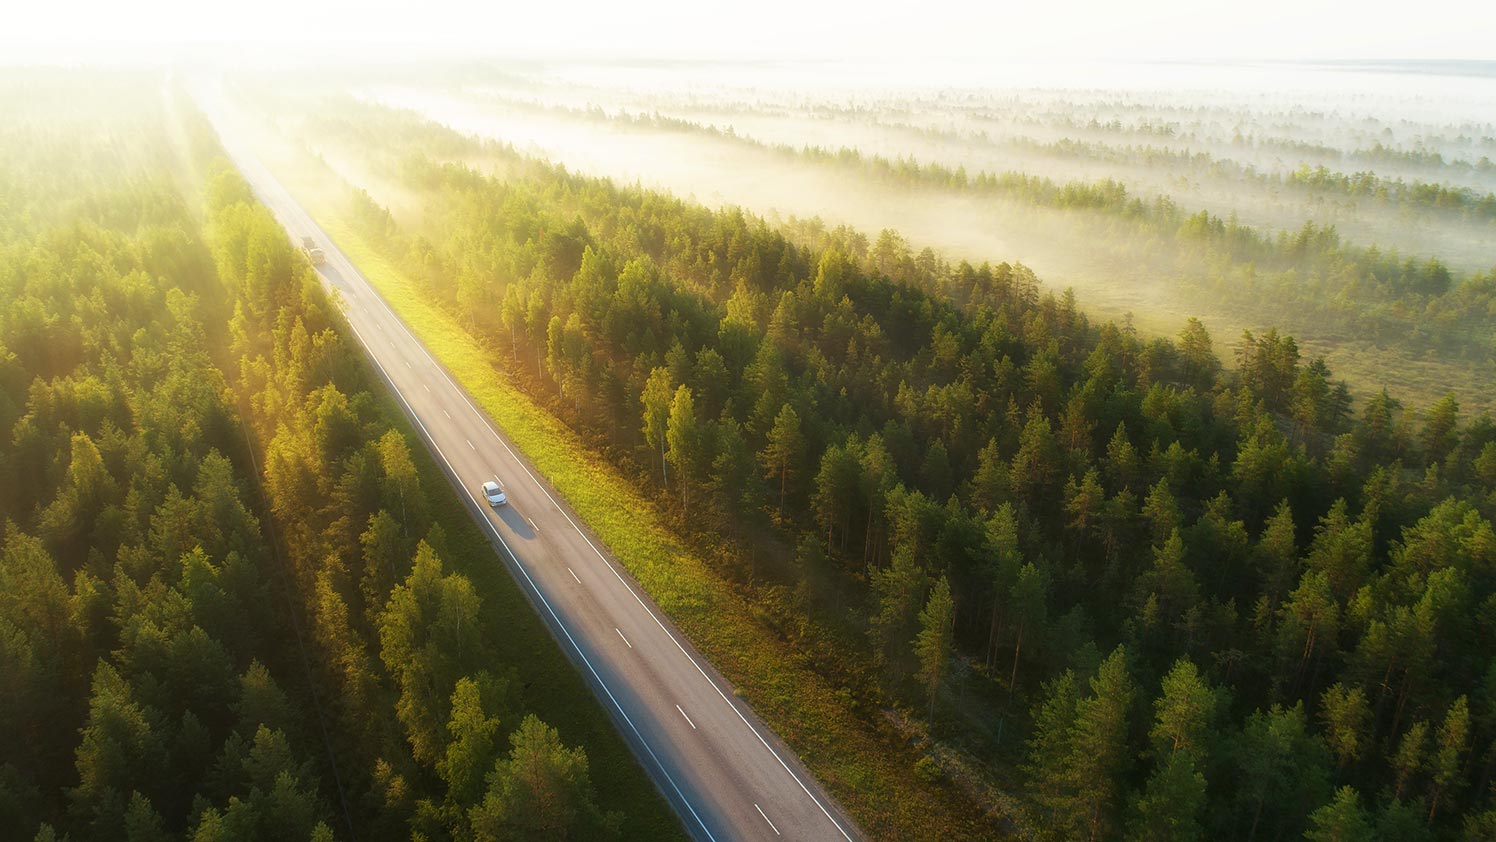 A highway road through green forest sustainability